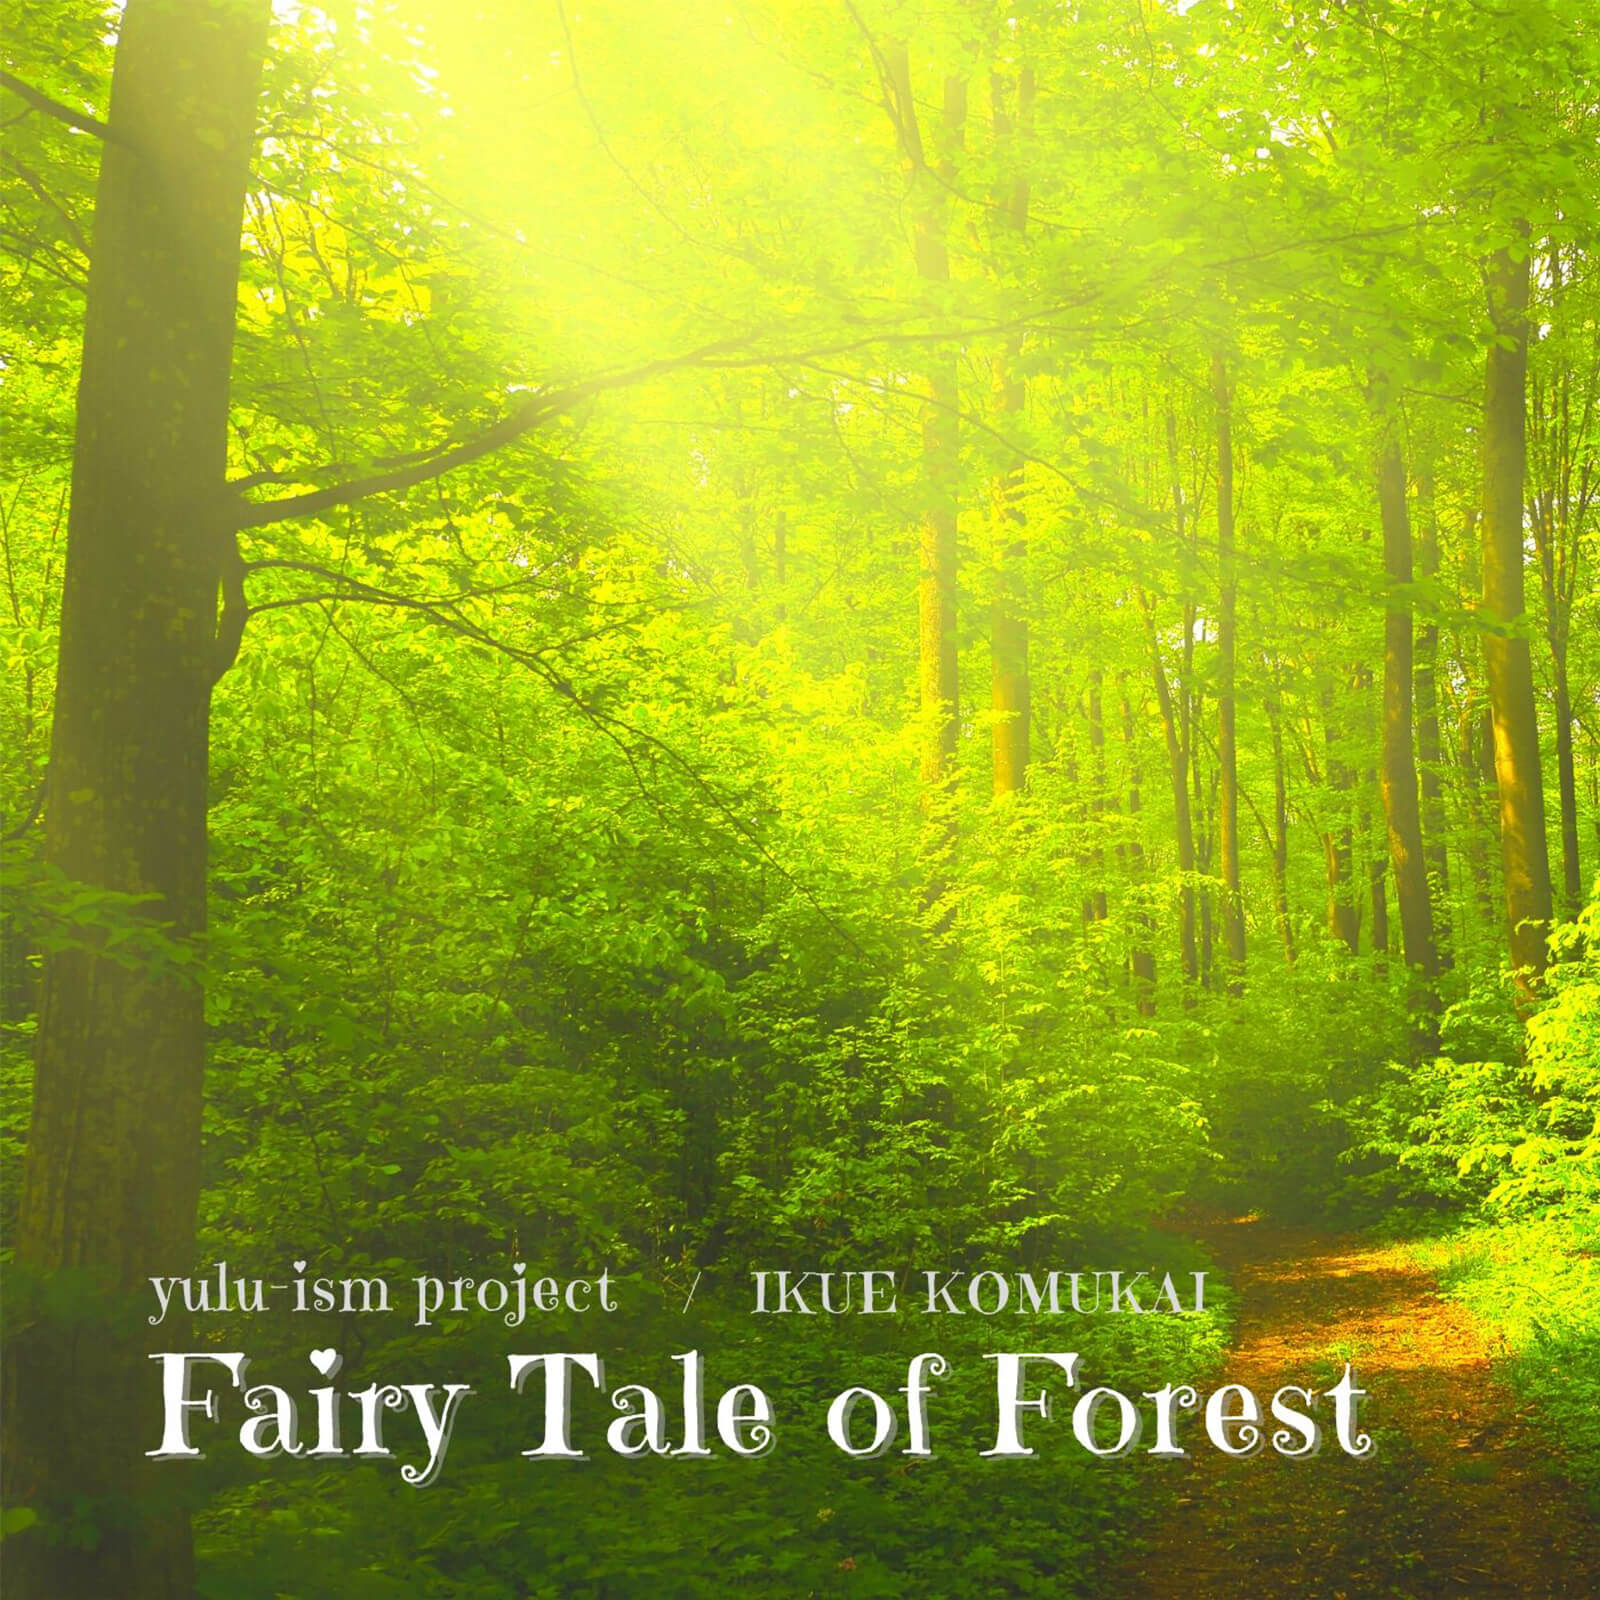 Fairy Tale of ForestのCDジャケット